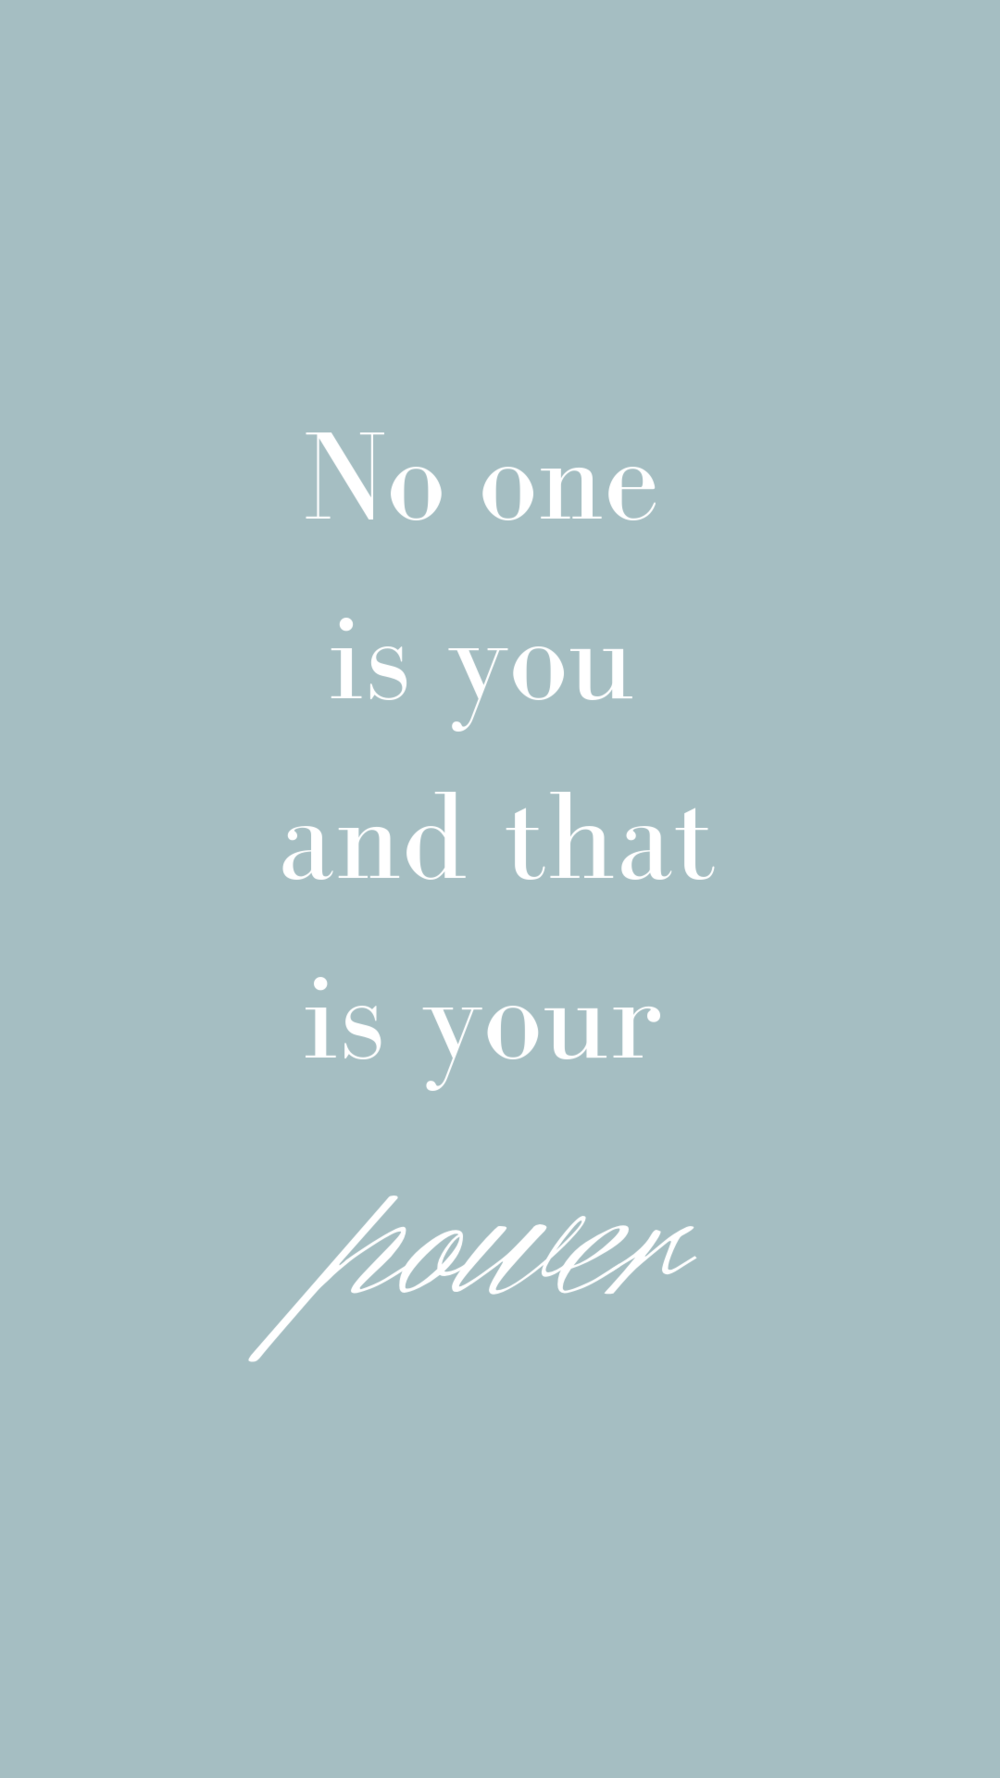 No one is you and that is your power | Empowering Quotes for Your Phone Screen Background | Miranda Schroeder Blog | www.mirandaschroeder.com